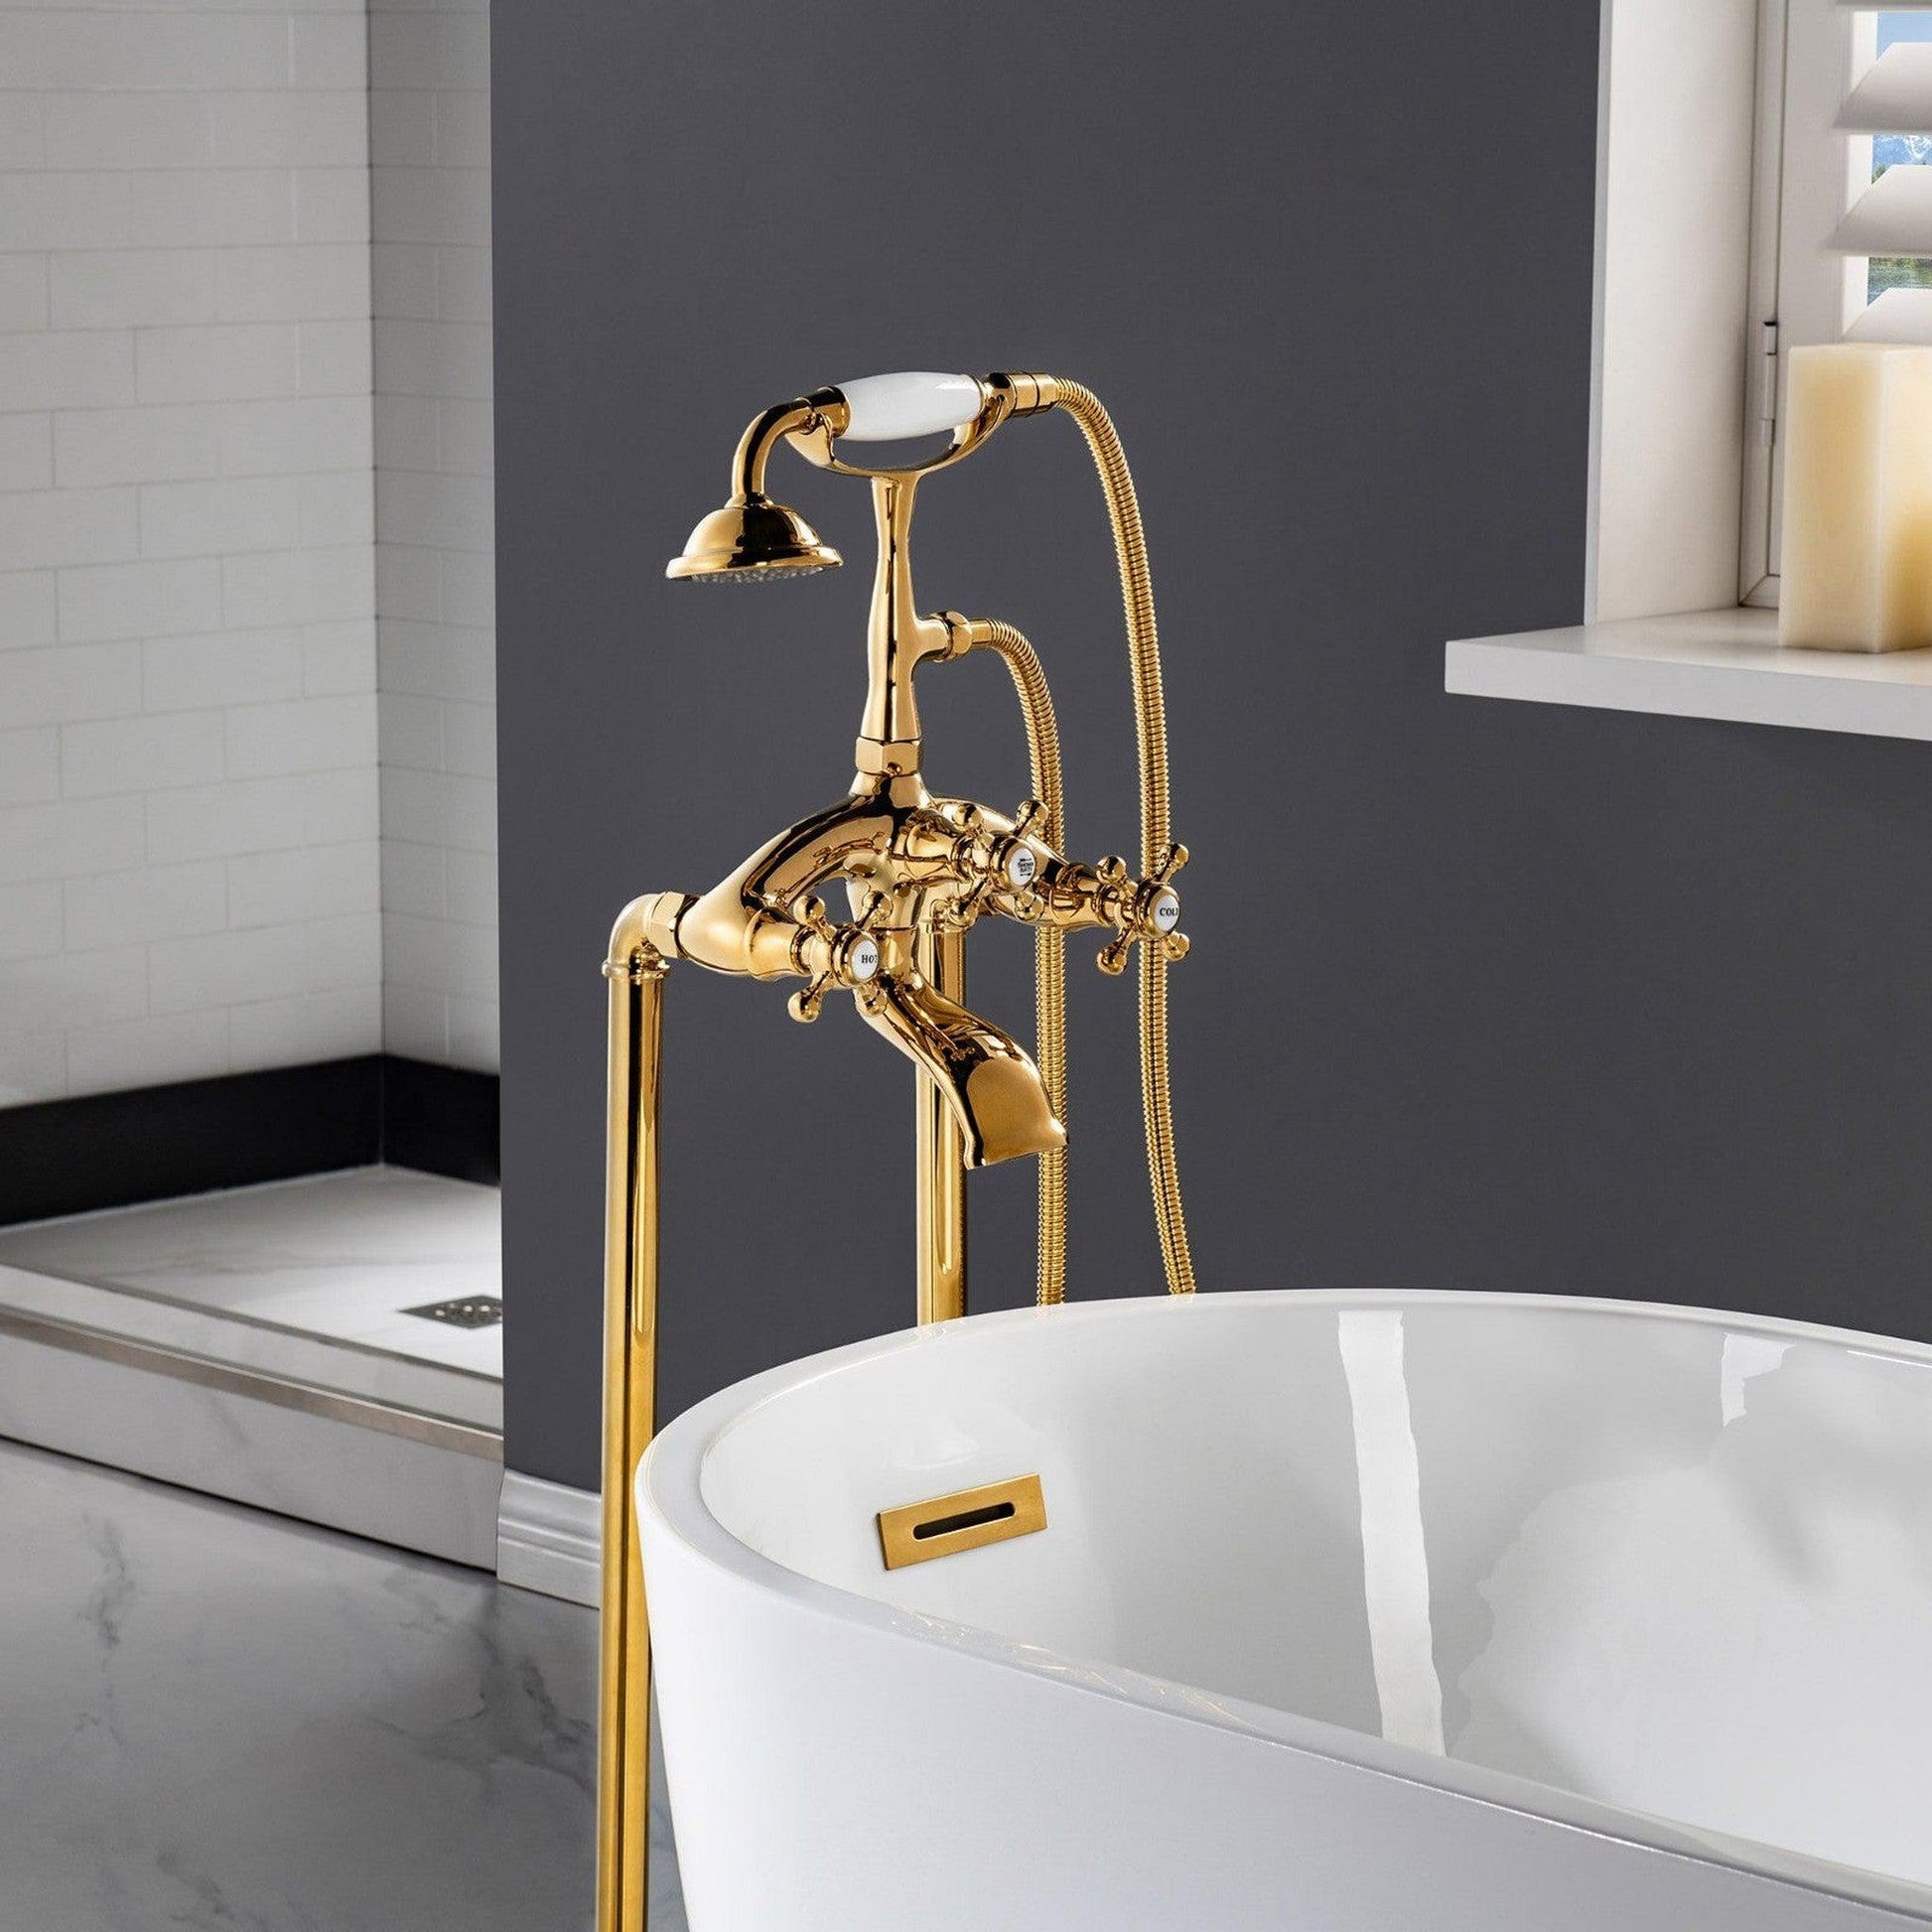 WoodBridge F0019PG Polished Gold Freestanding Clawfoot Tub Filler Faucet With Hand Shower and Hose